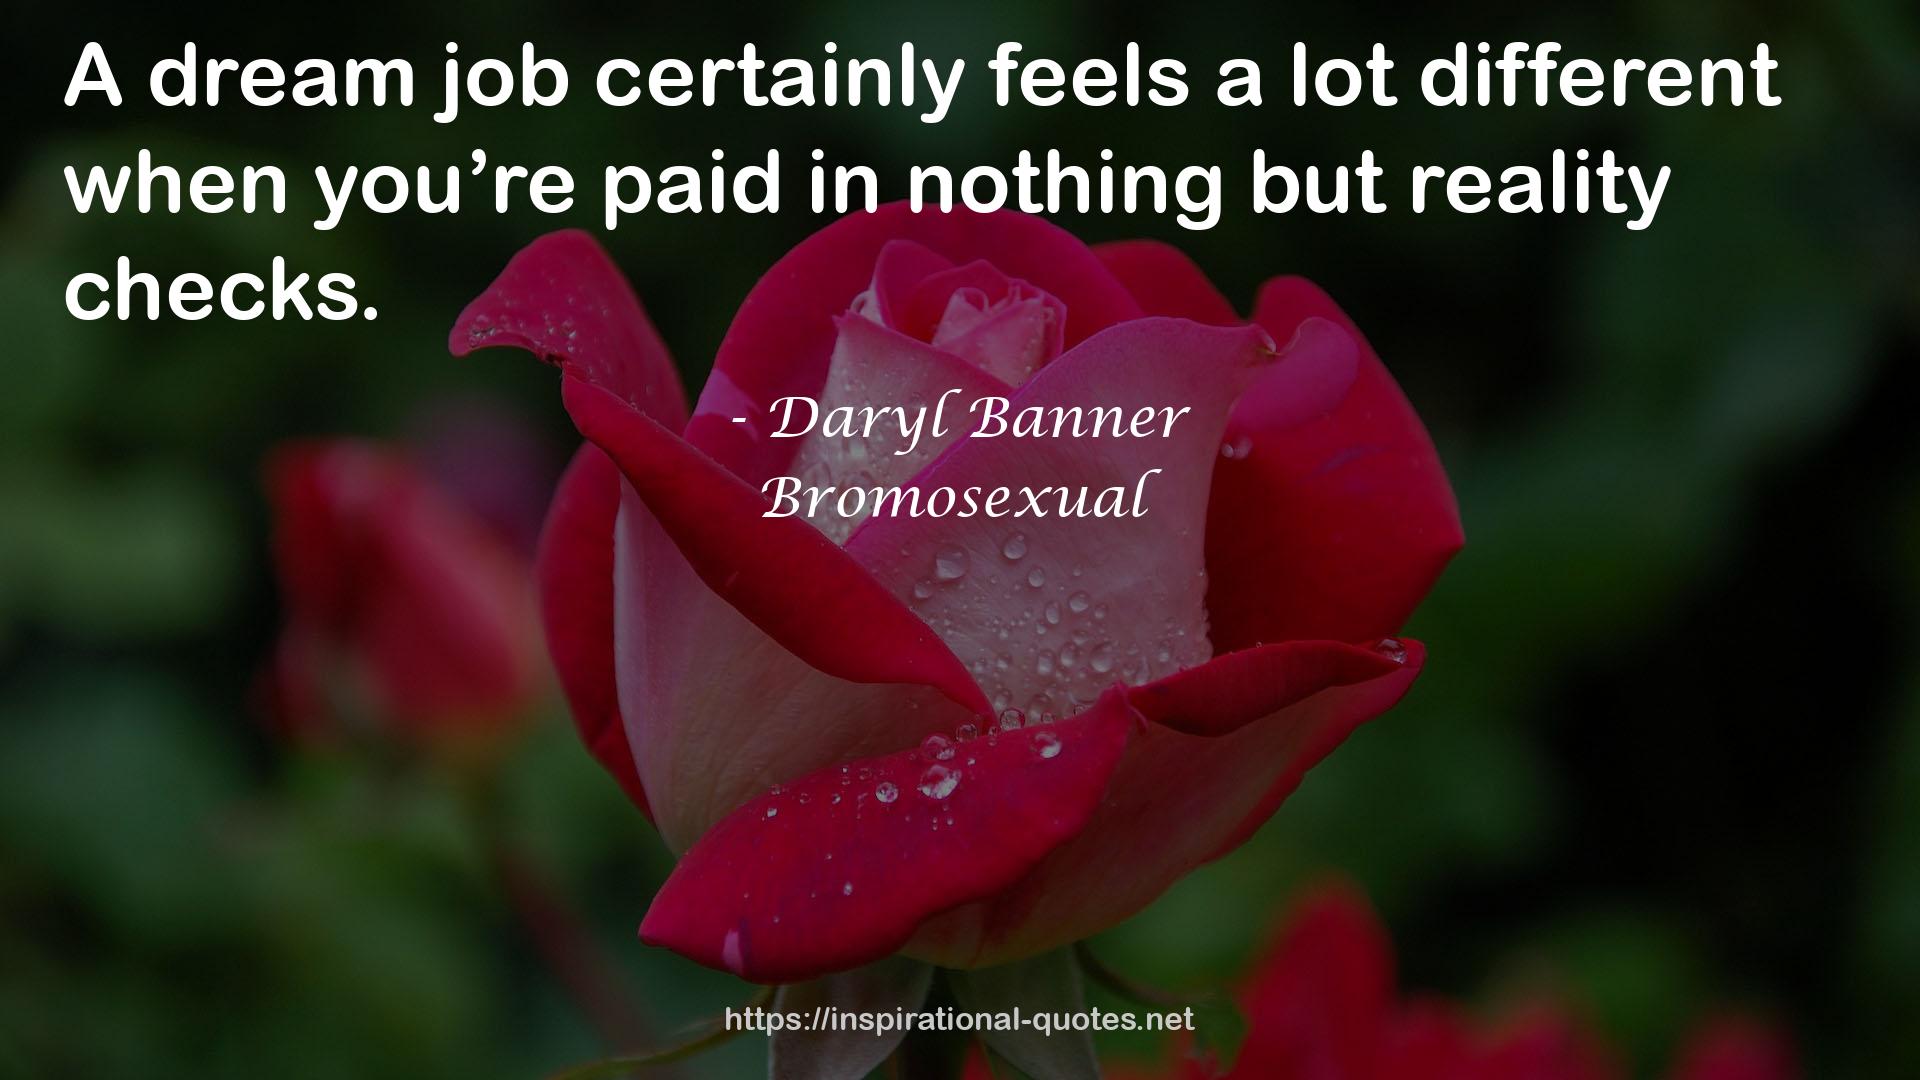 Bromosexual QUOTES